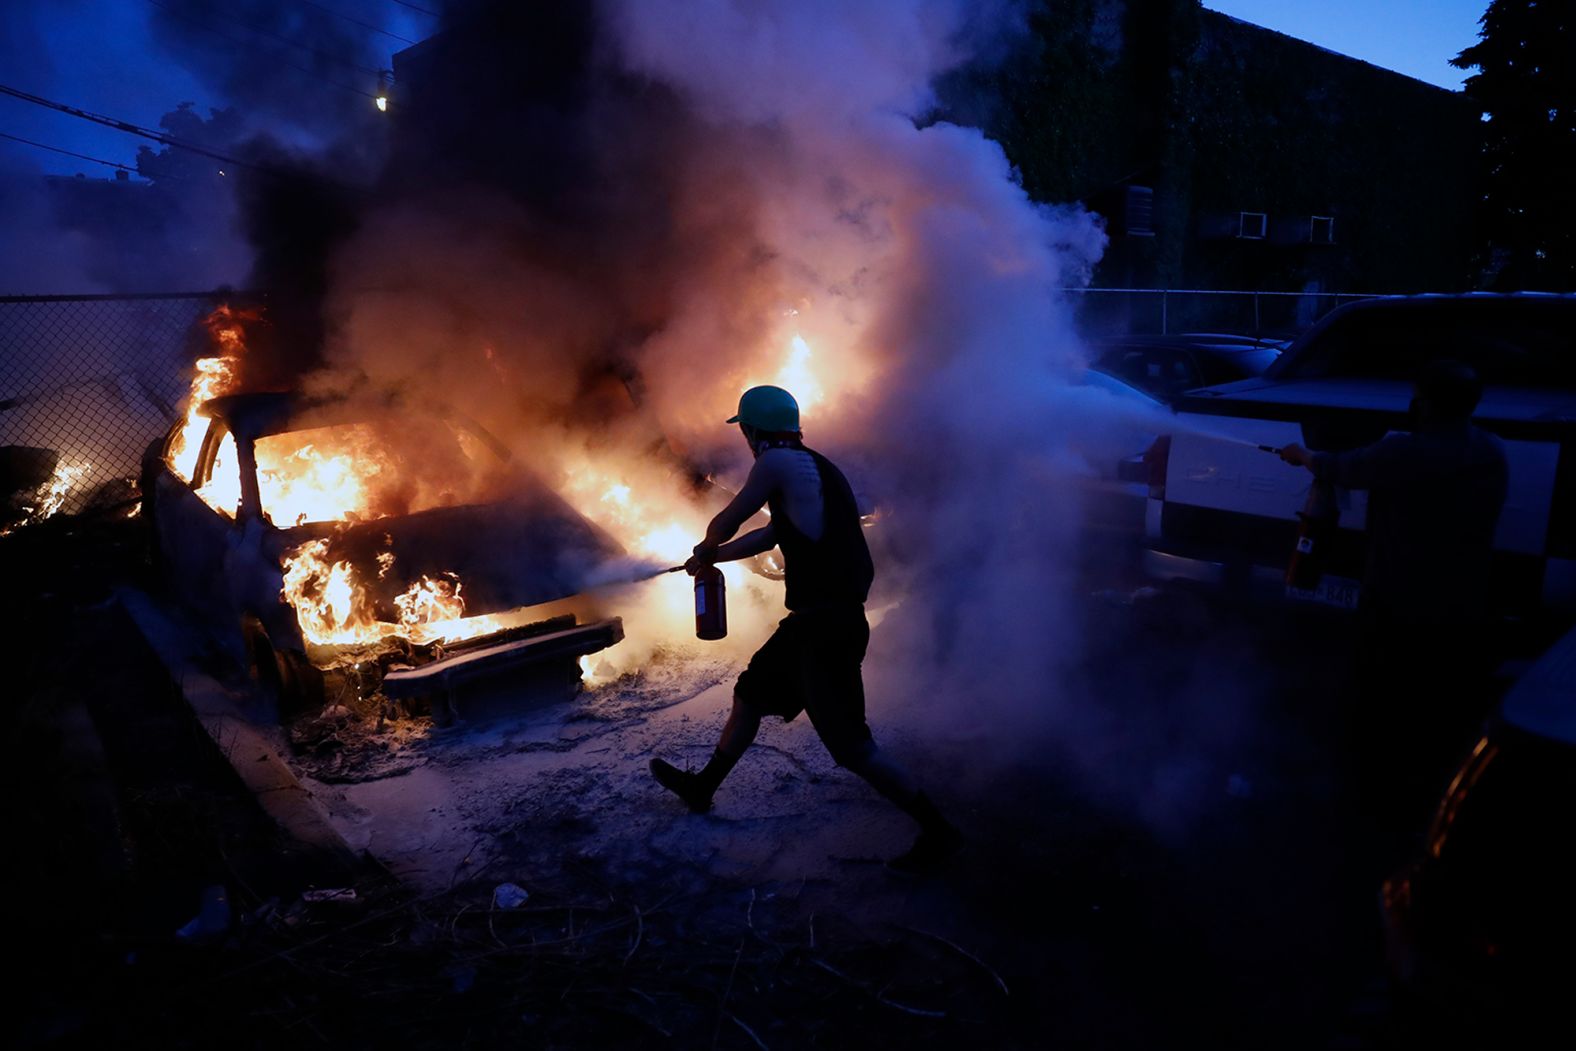 People in Minneapolis attempt to extinguish burning cars on May 29.